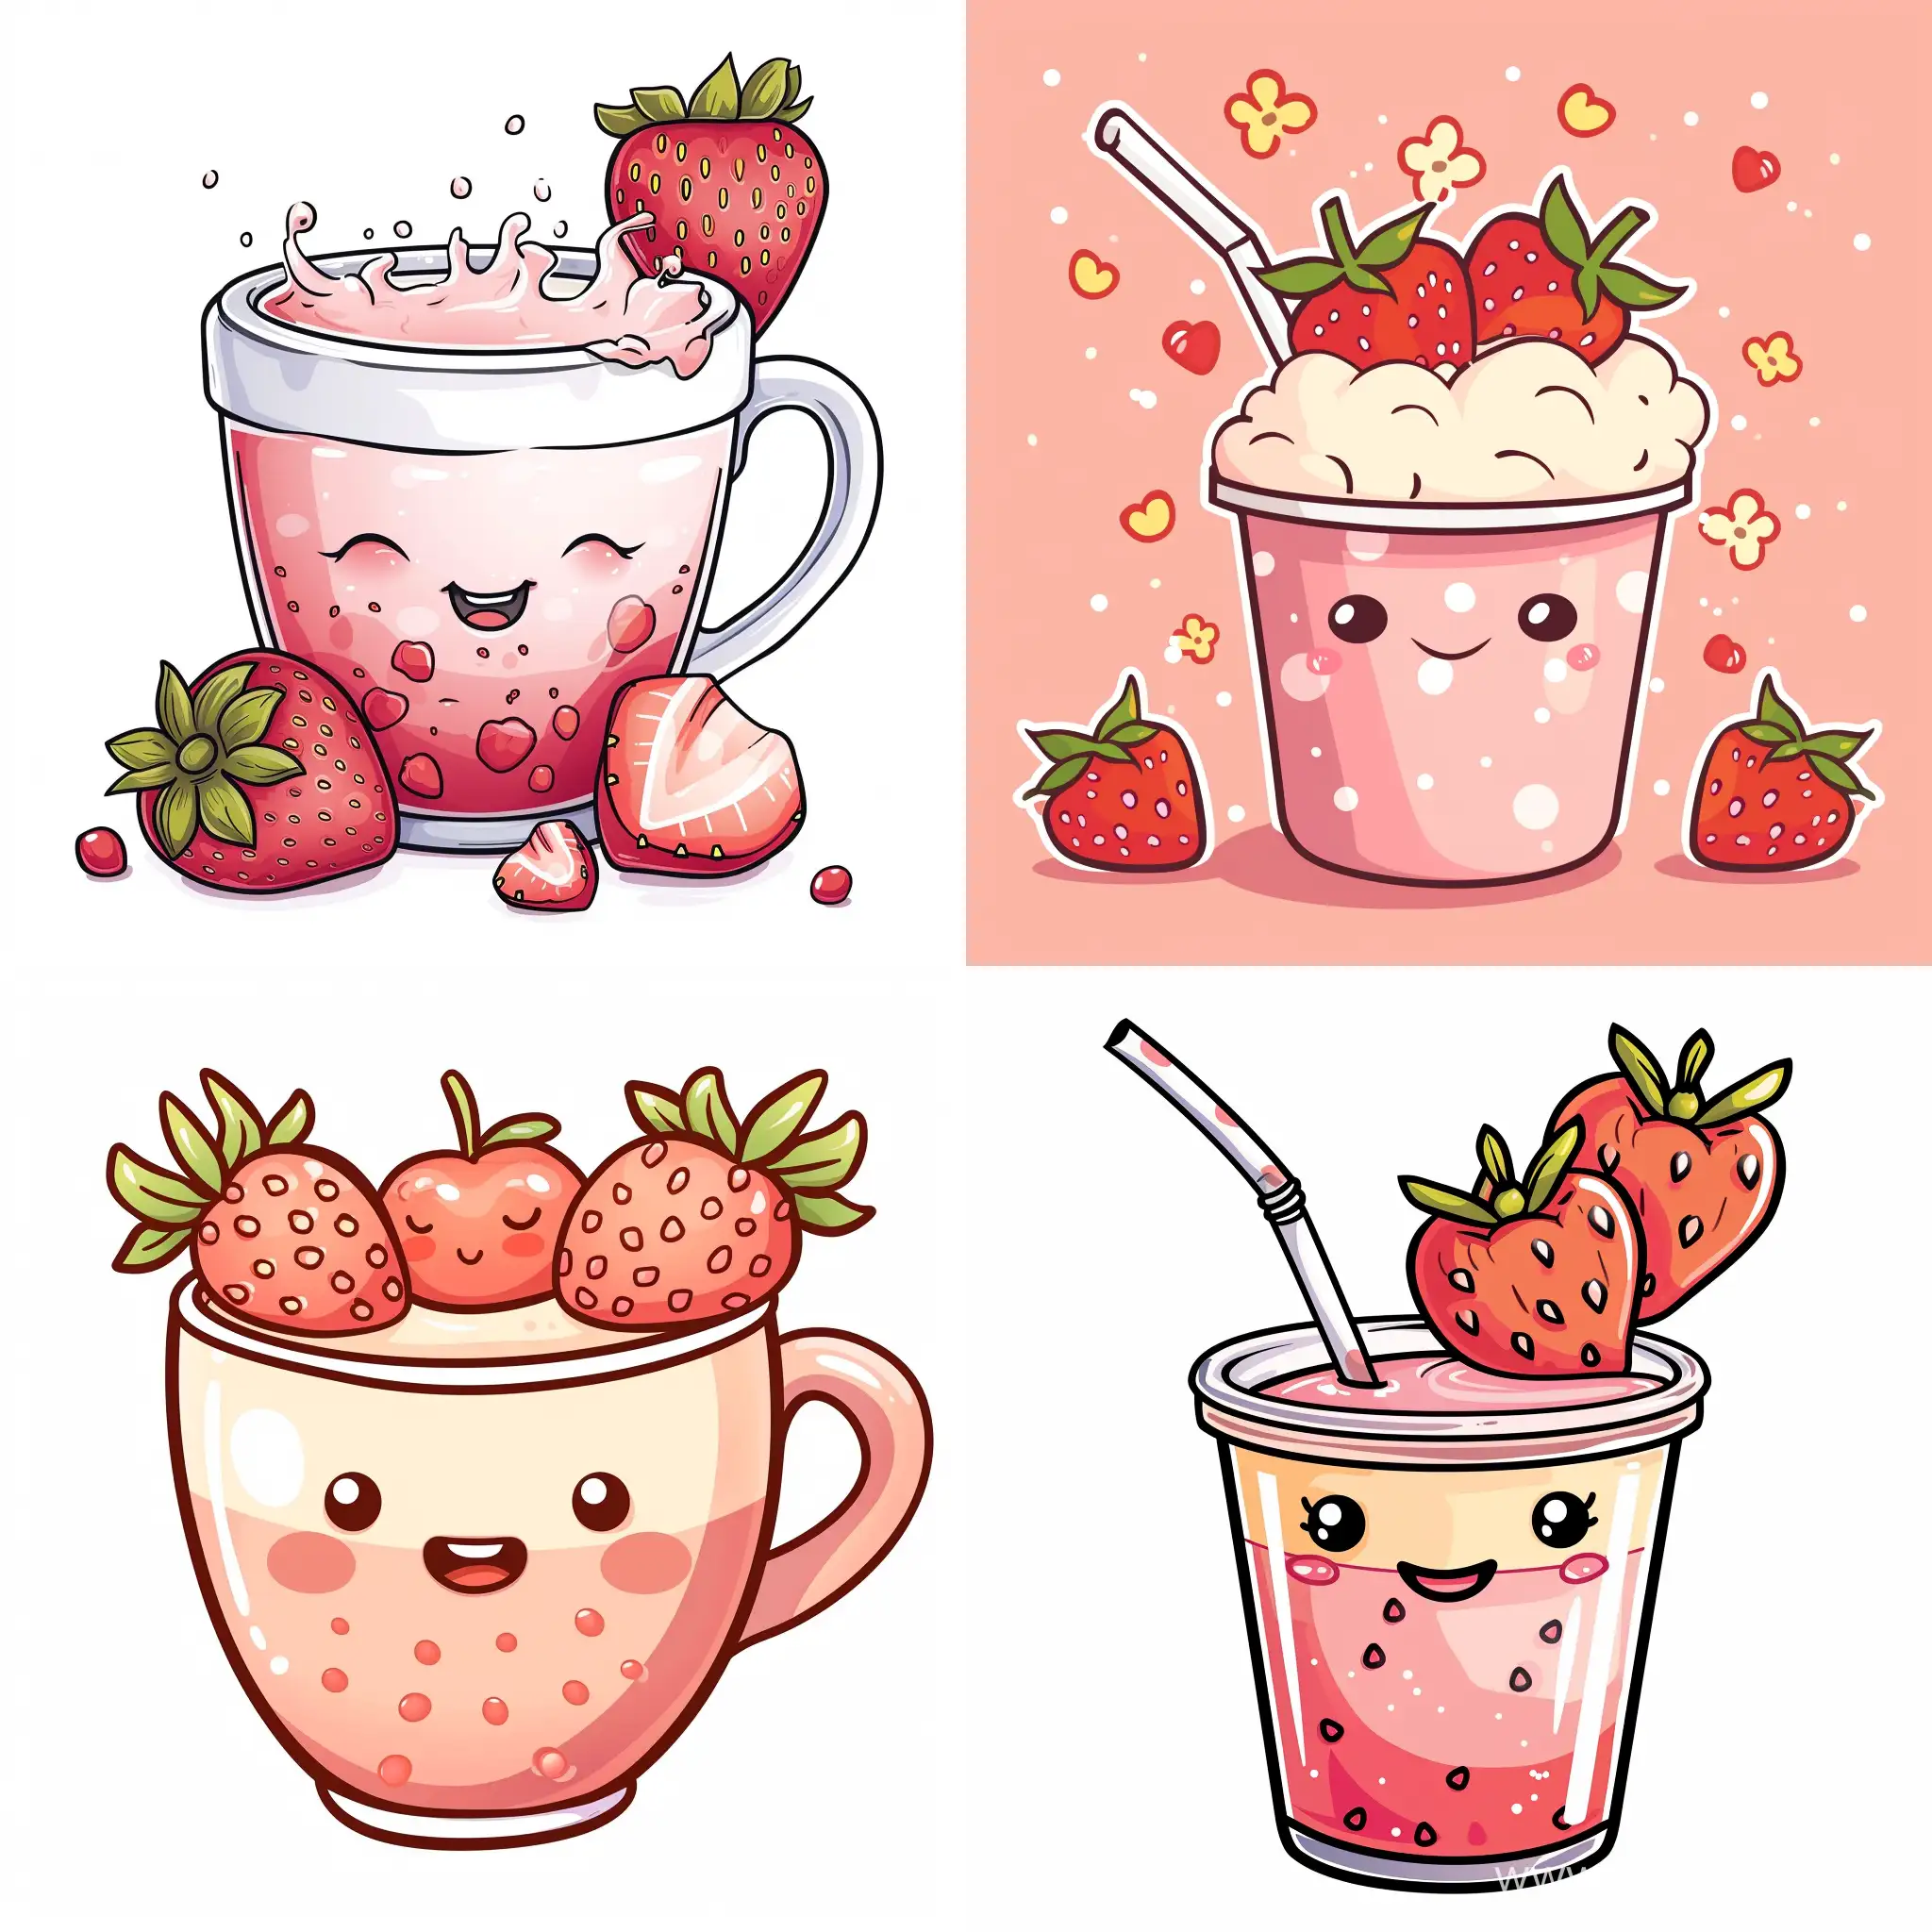 Adorable-Kawaii-Strawberry-Milk-Tea-Cup-with-HighQuality-Details